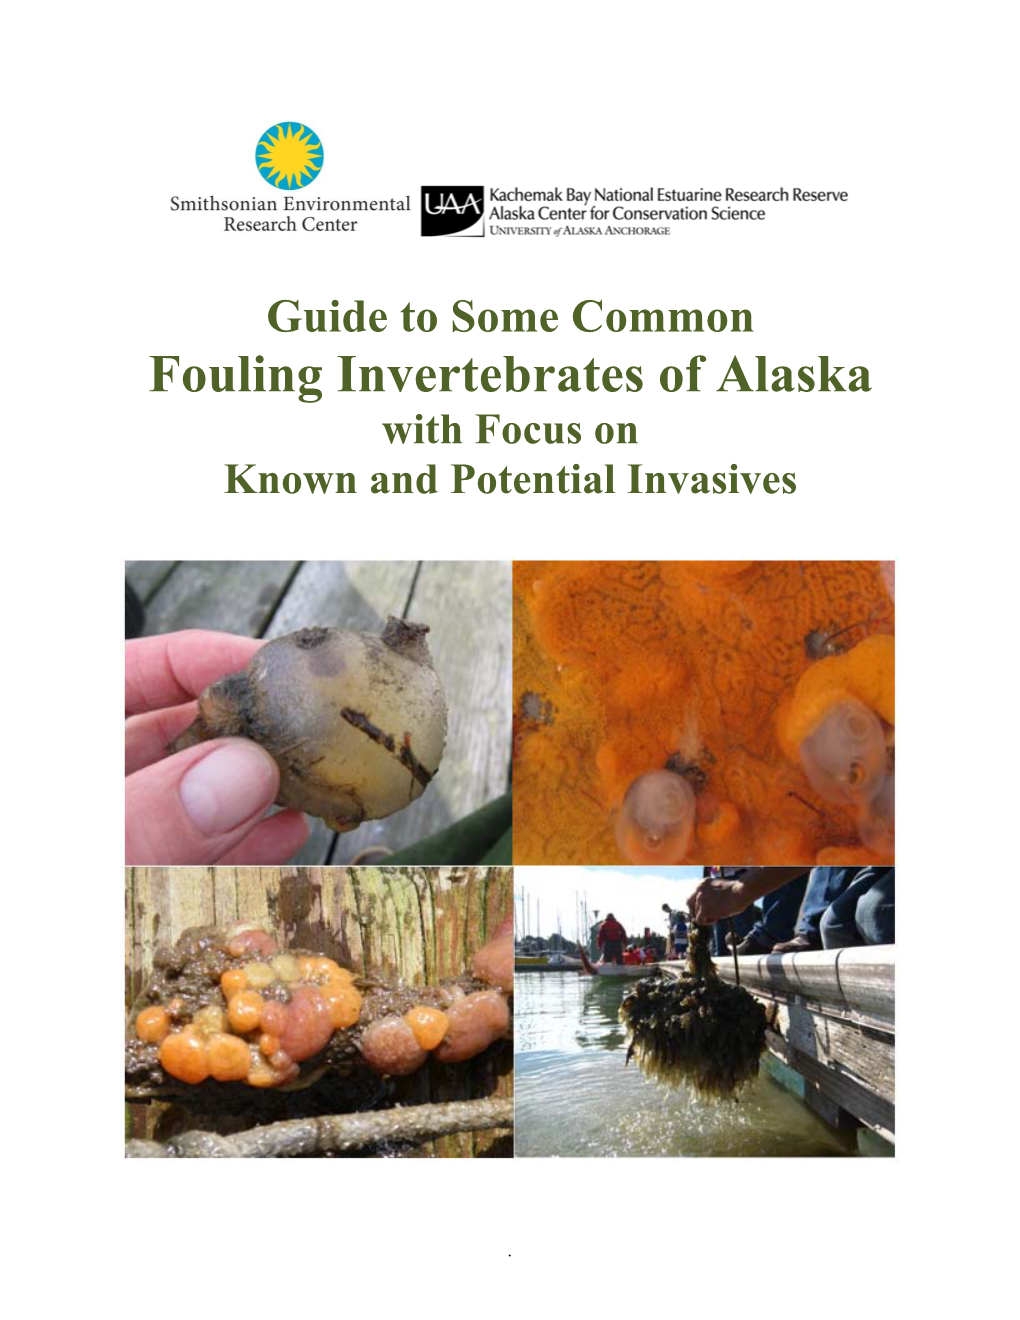 Fouling Invertebrates of Alaska with Focus on Known and Potential Invasives